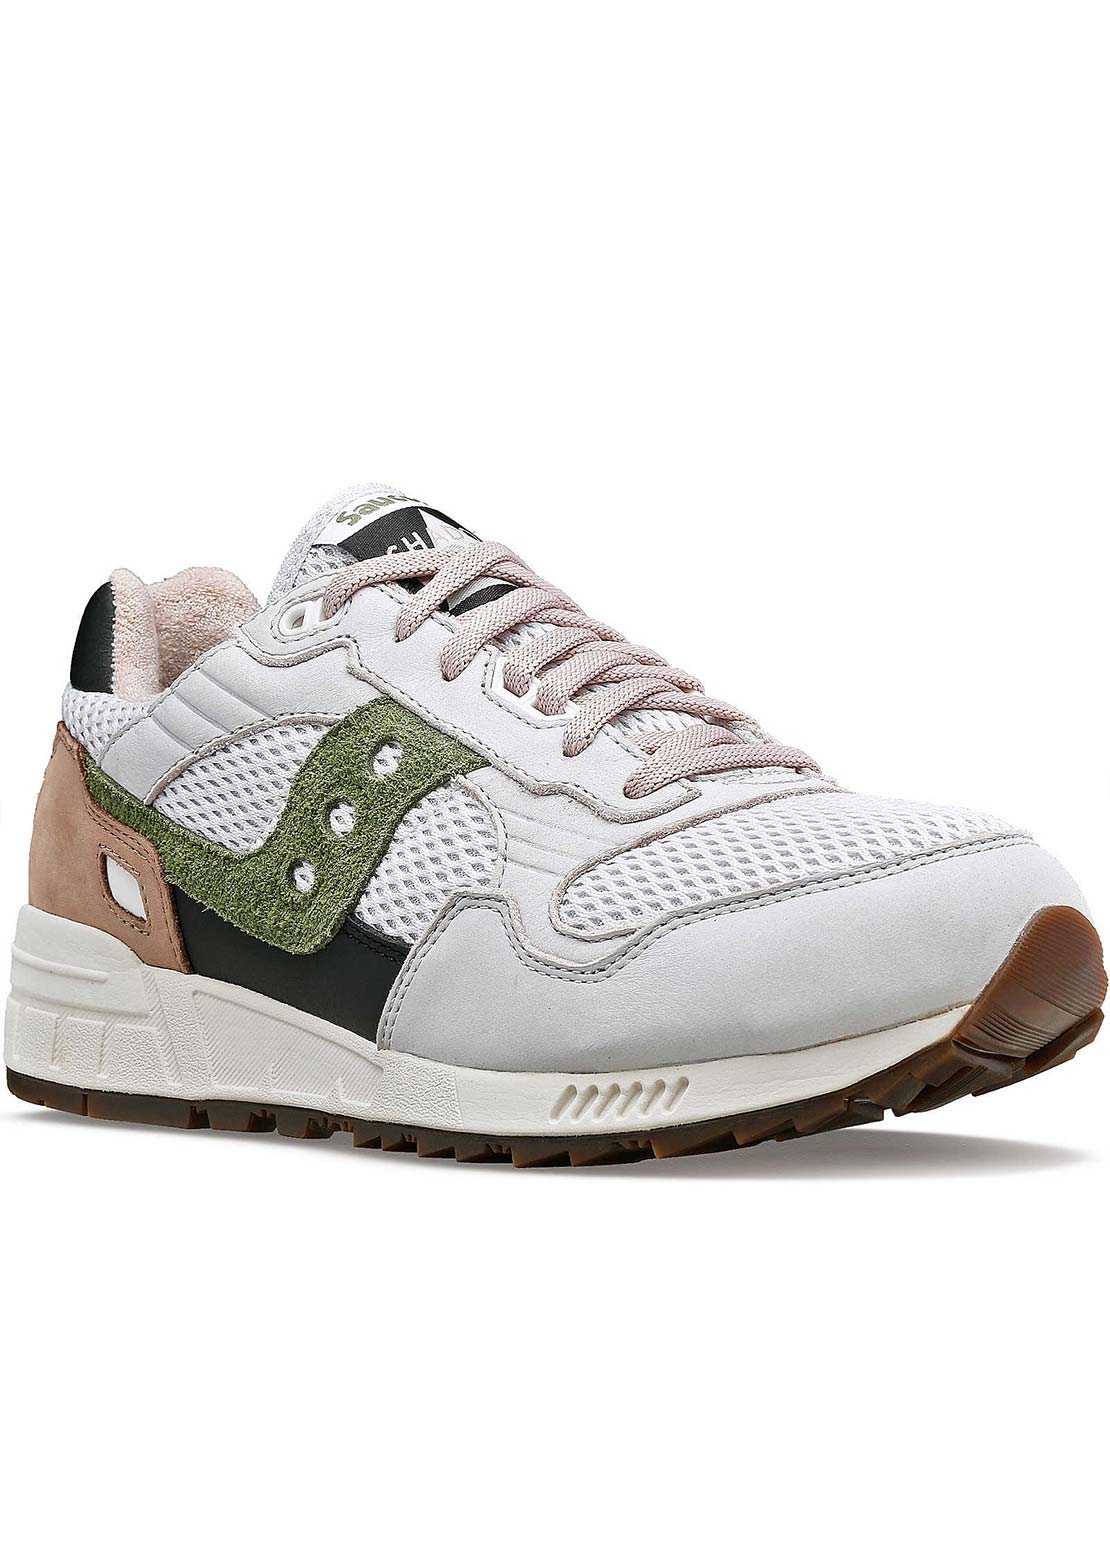 Saucony Unisex Shadow 5000 Shoes Grey/Green